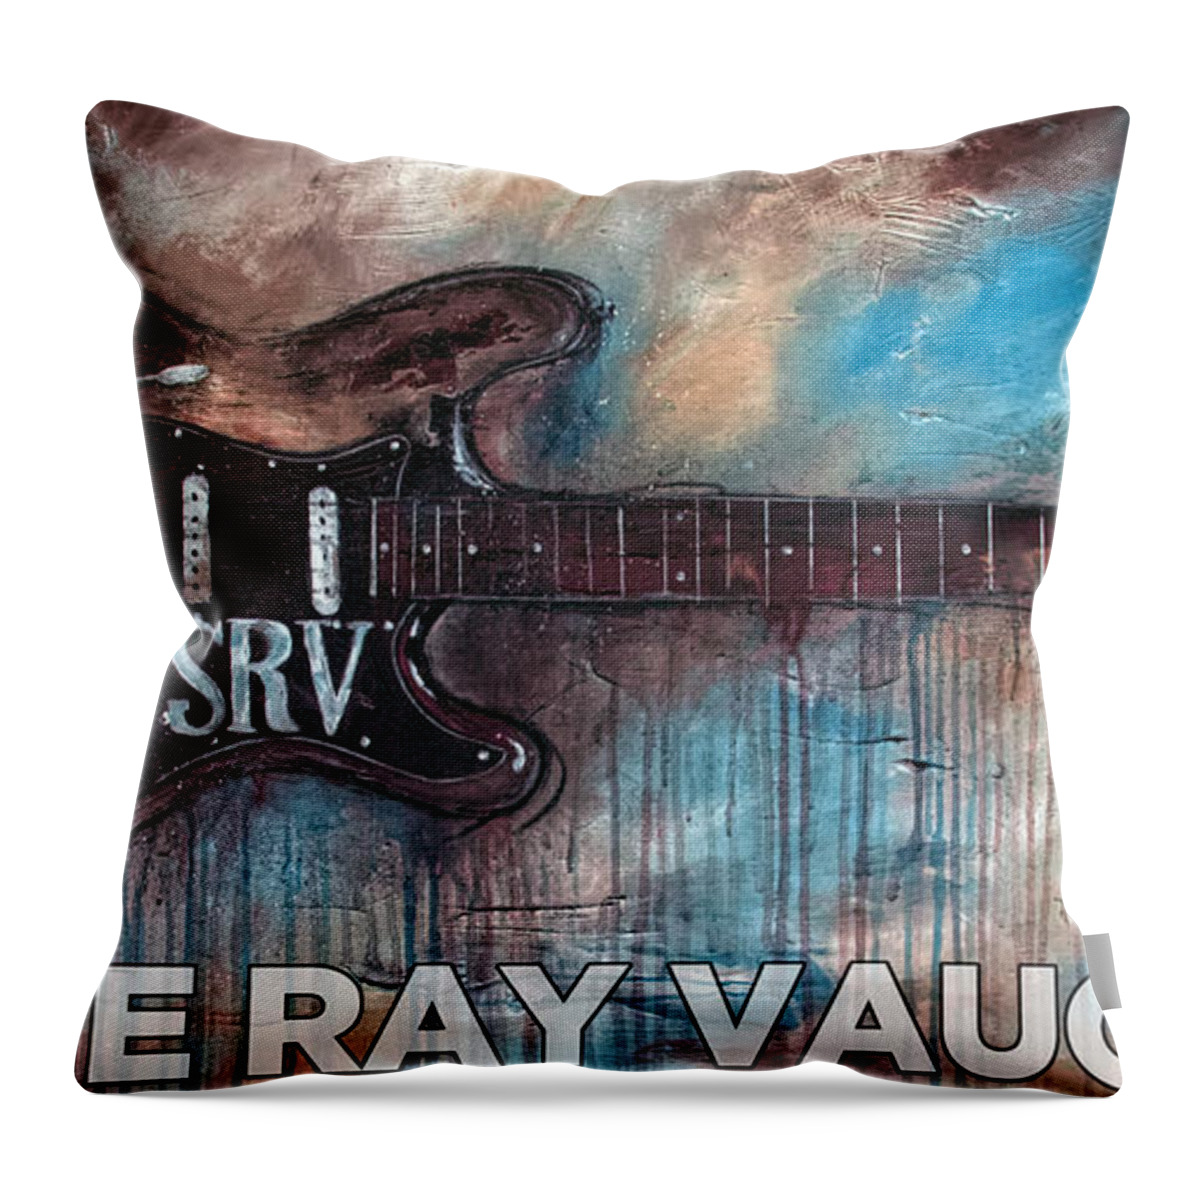 Stevie Ray Vaughan Throw Pillow featuring the painting Stevie Ray Vaughan Double Trouble by Sean Parnell